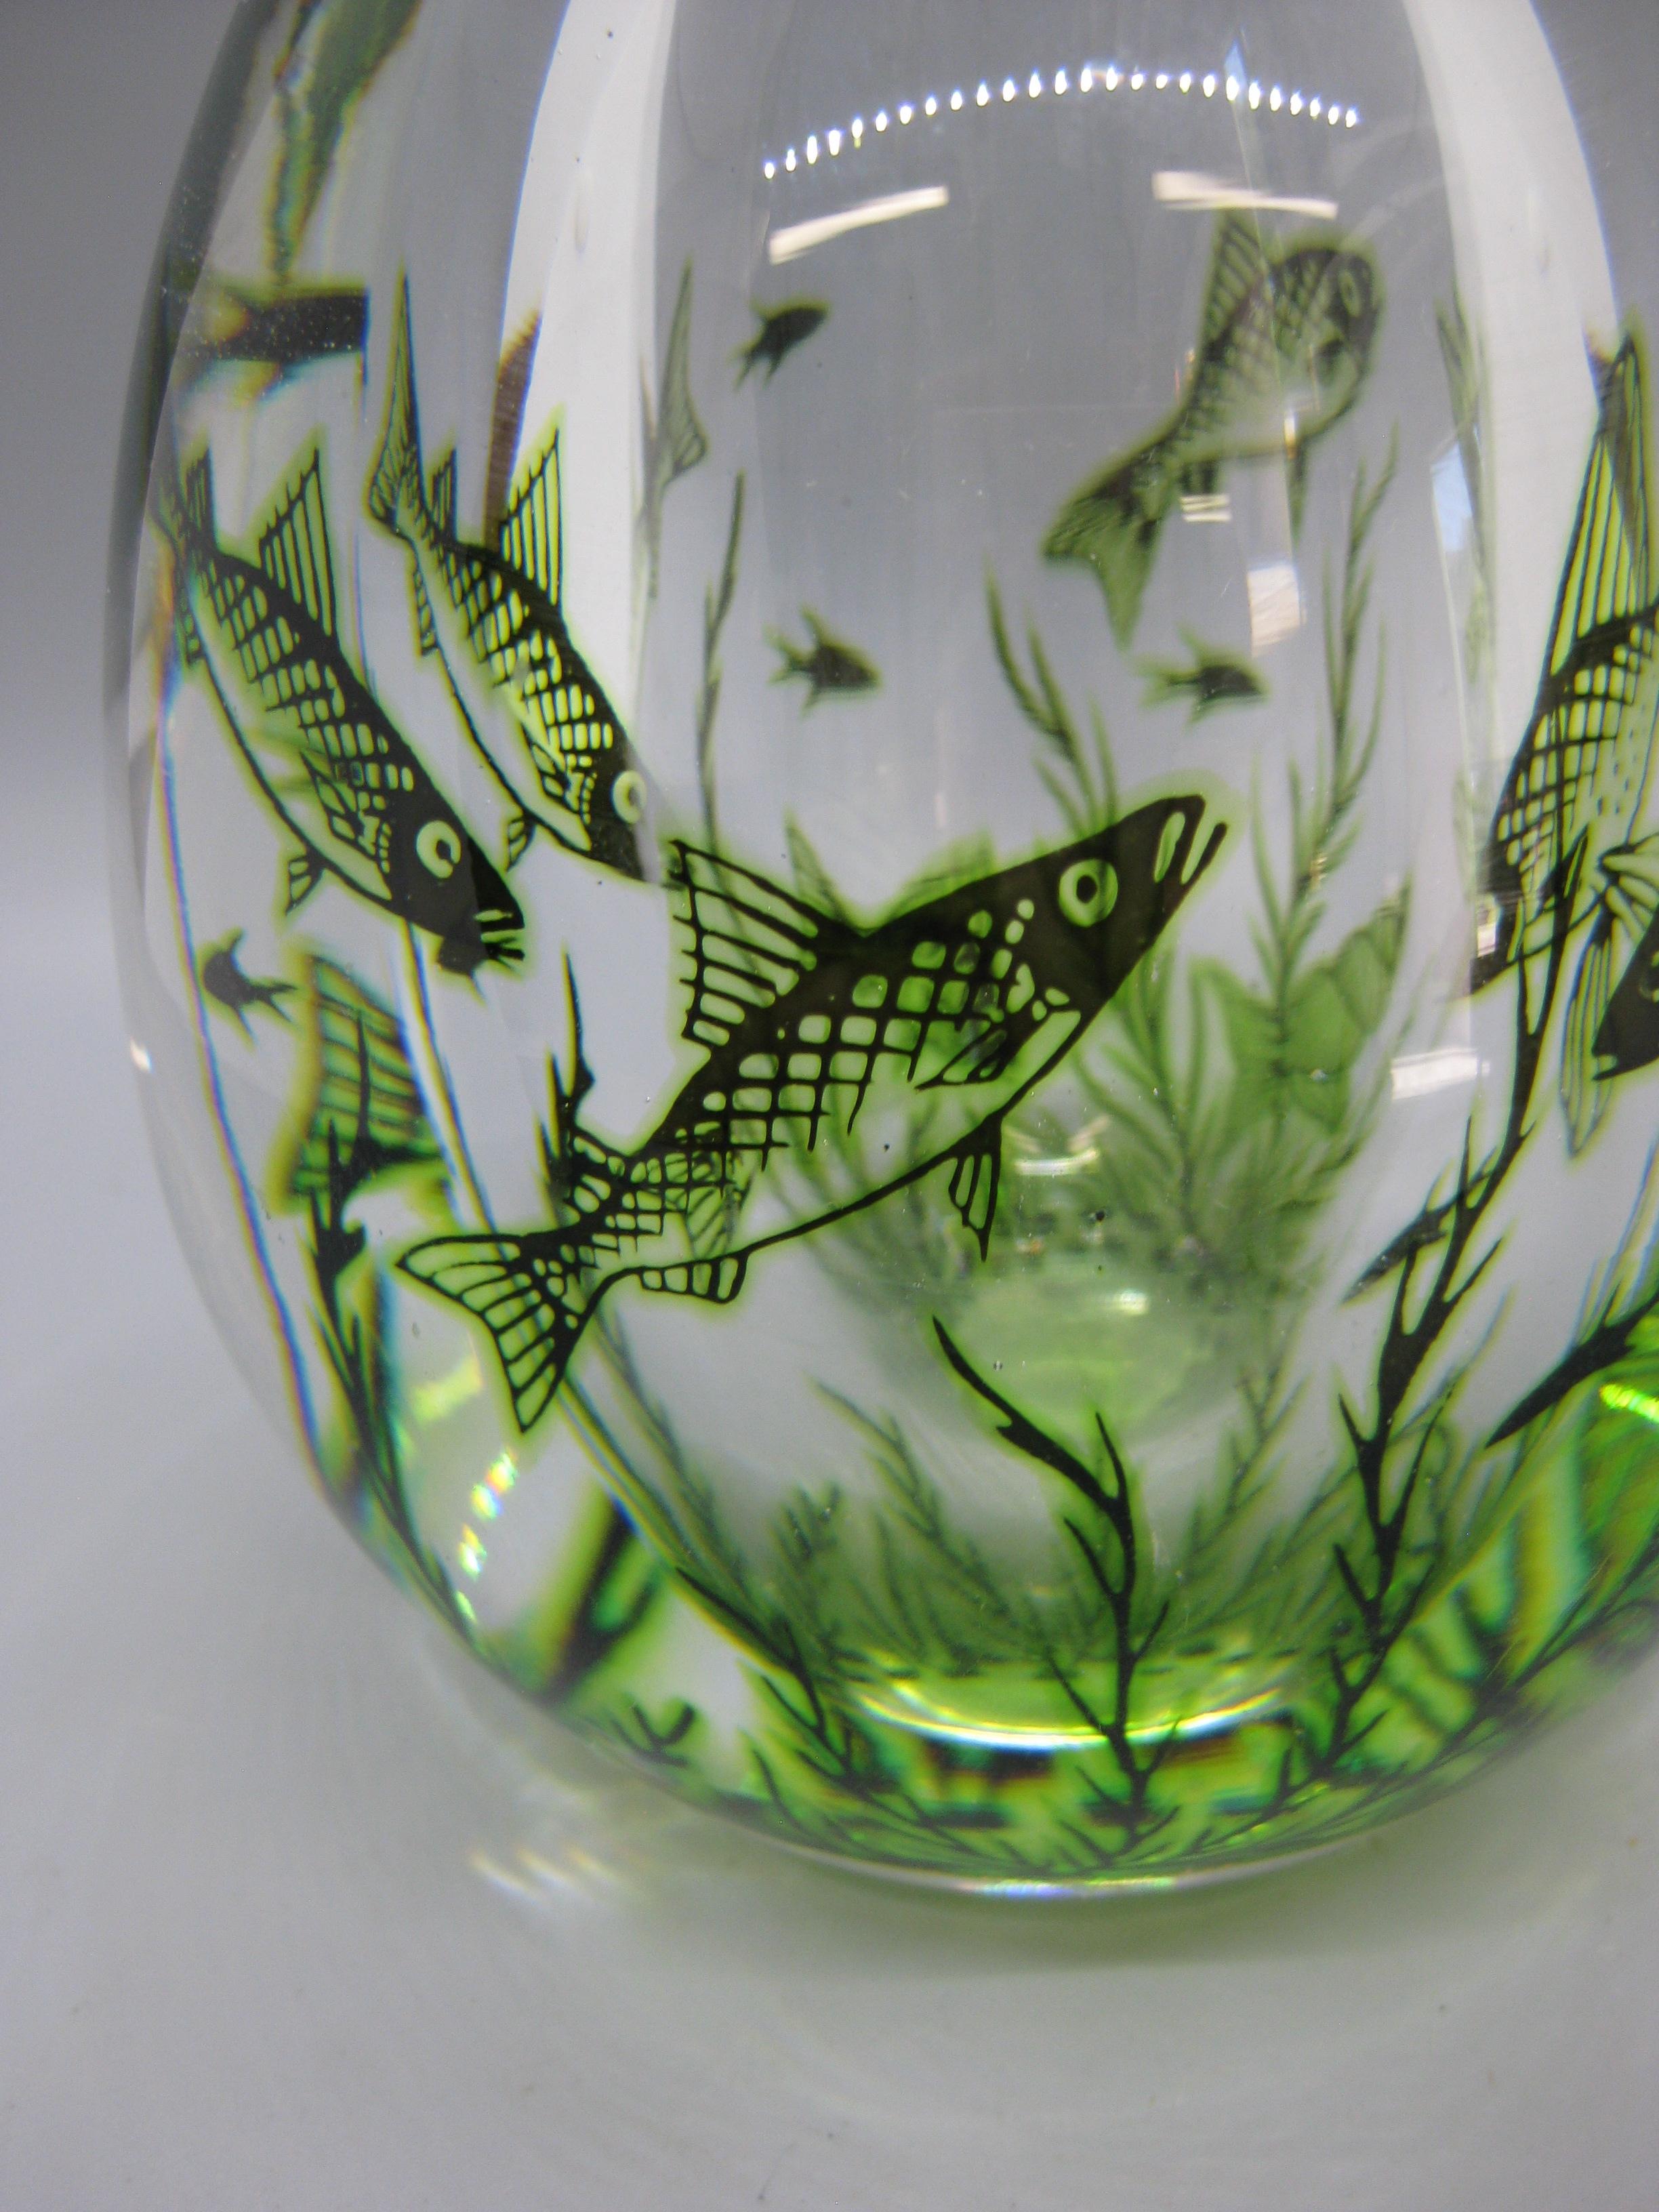 Wonderful Grall fish art glass vase Edward Hald for Orrefors and dates form the 1940's to early 1950's. Great design and form. Signed on the bottom by the artist. In excellent condition for its age.  No cracks, no repairs and no chips. Color is